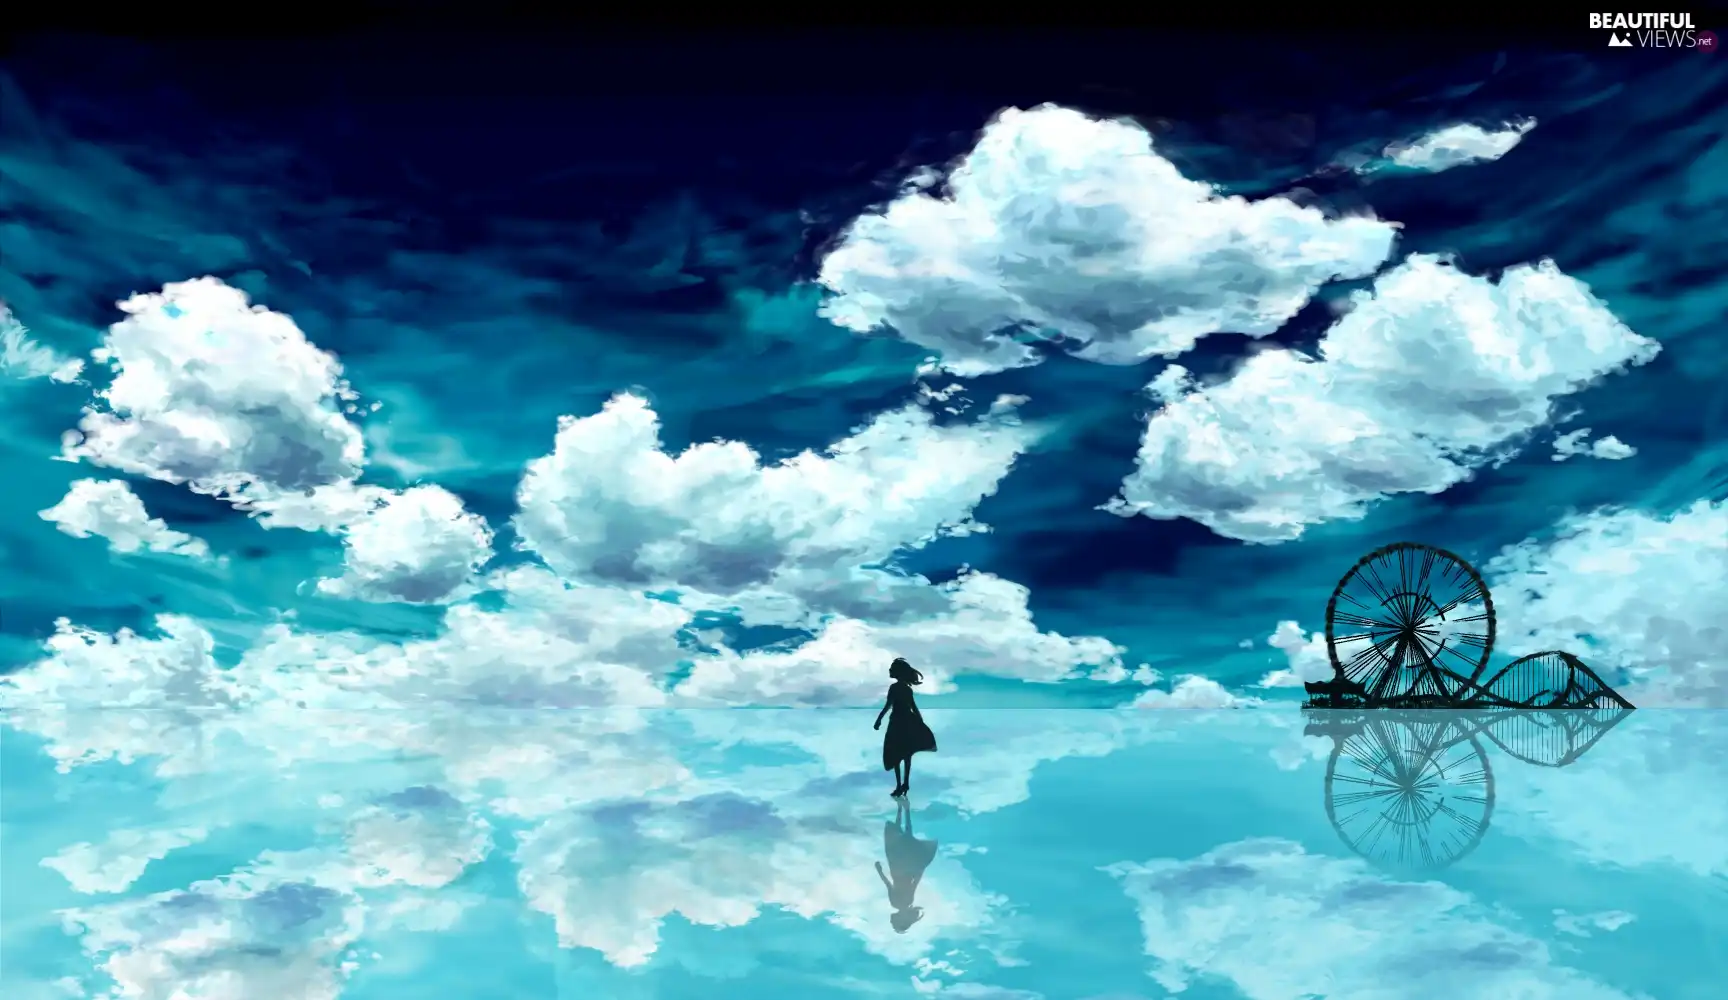 Sky, clouds, reflection